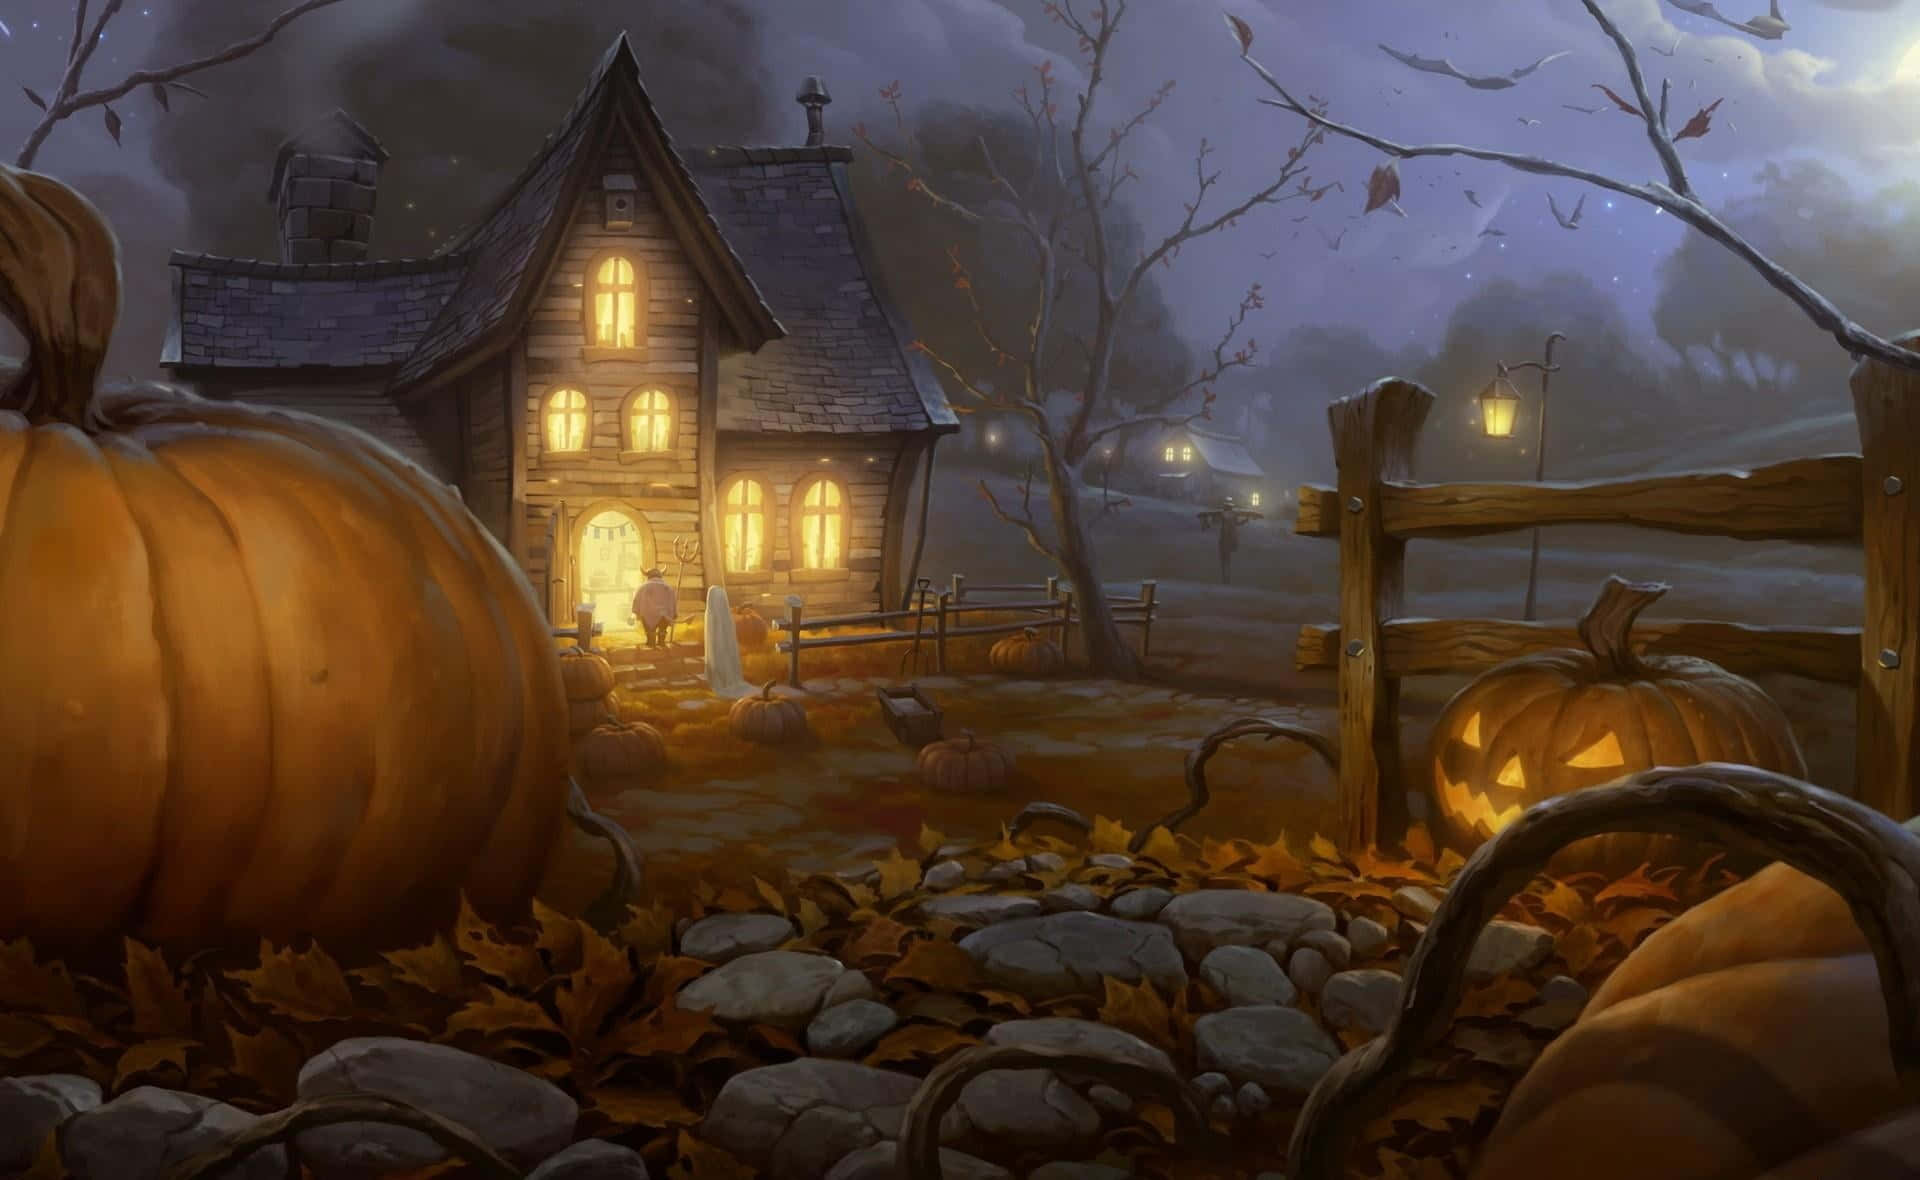 Spooky Halloween Pumpkin Ghost House Picture